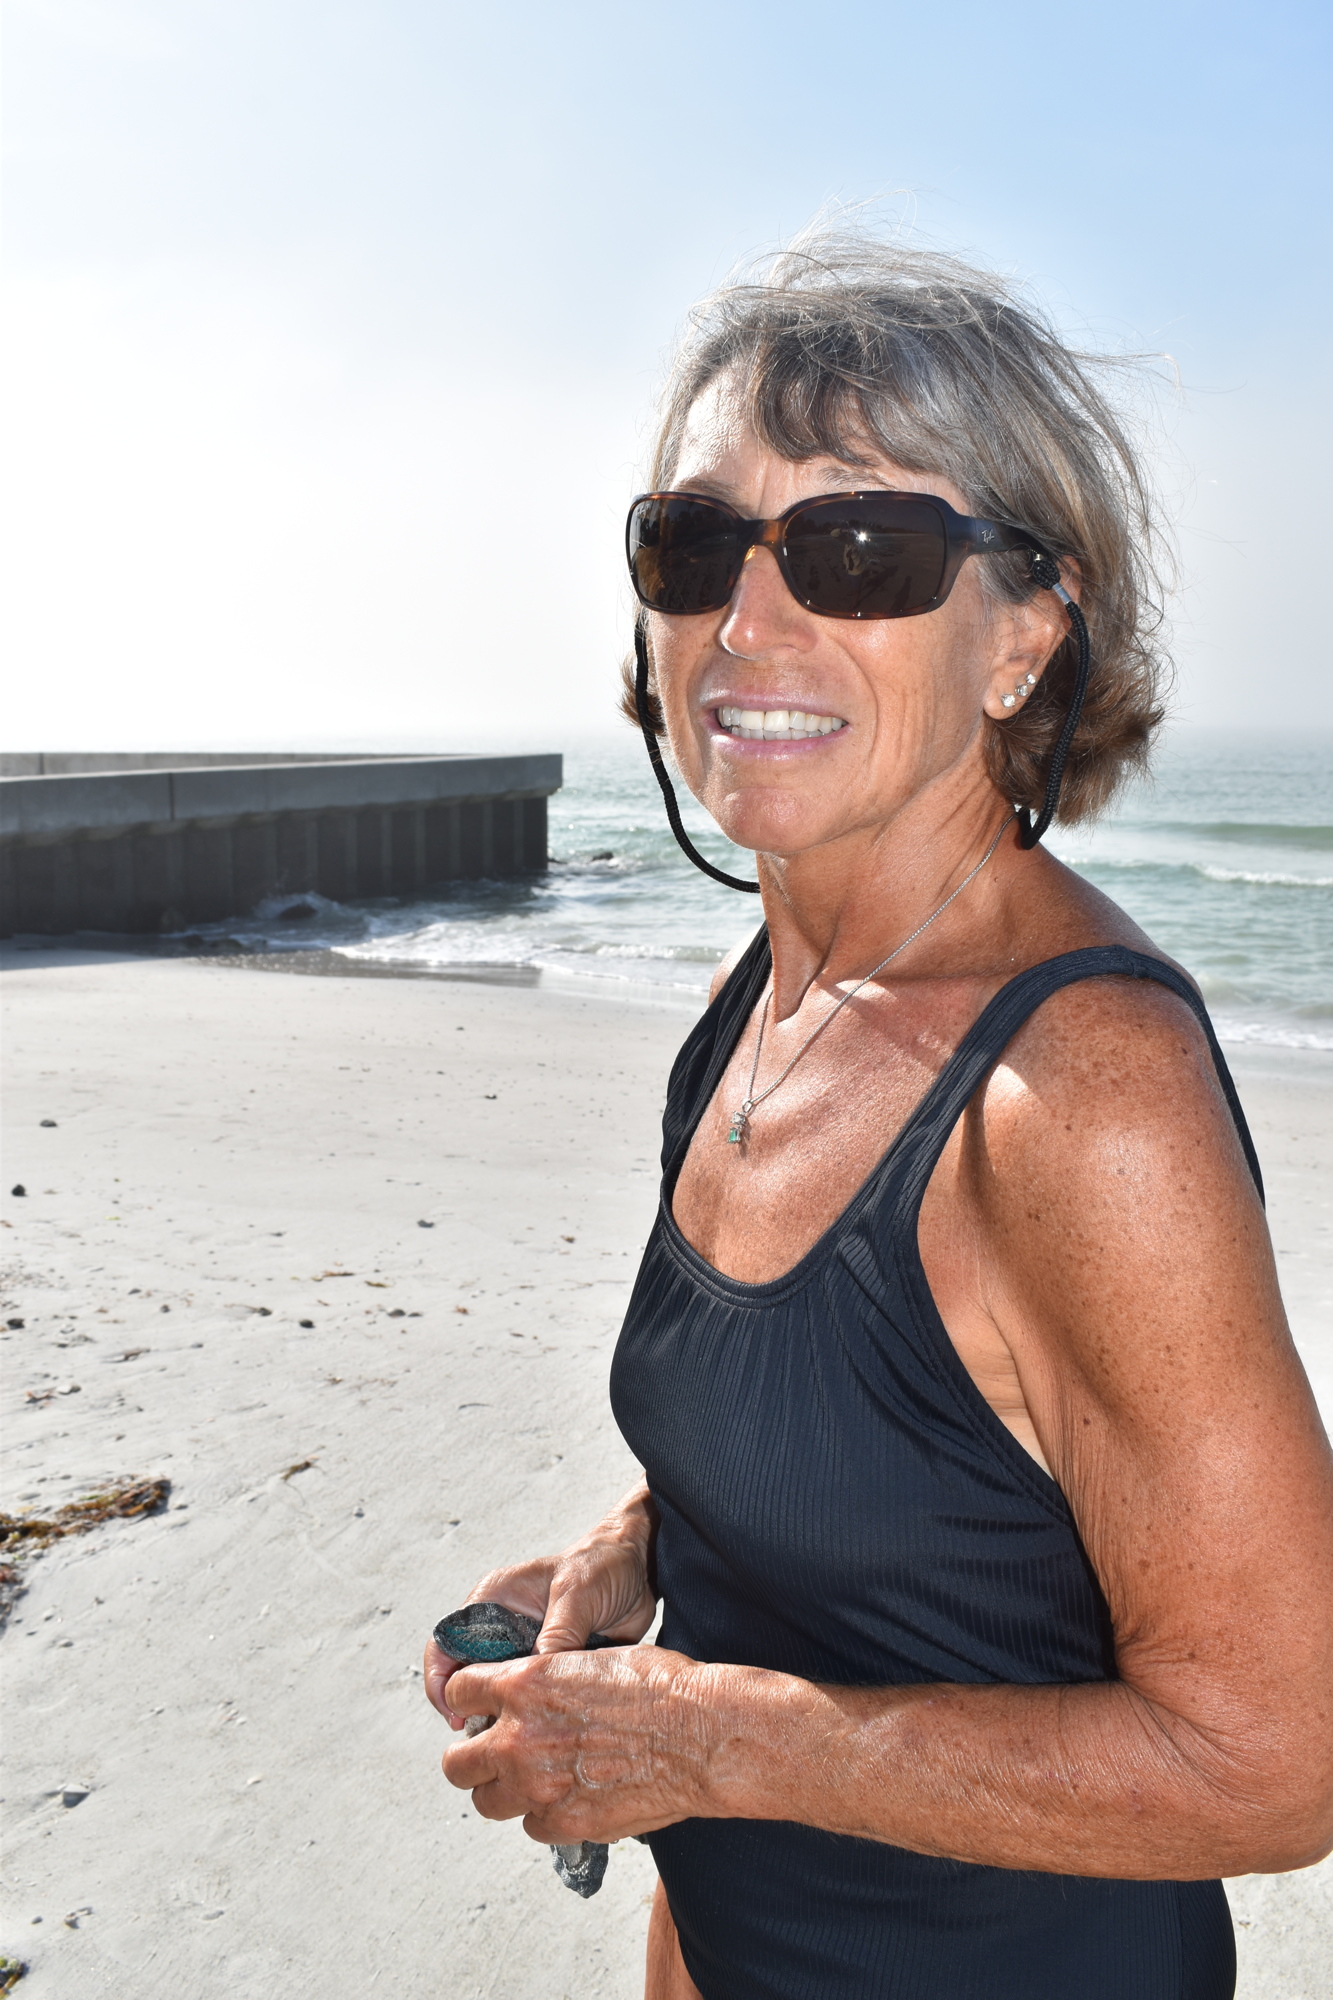 Palma Sola resident Brenda Cantin enjoys visiting the beach in Longboat Key to go for walks and collect seashells.